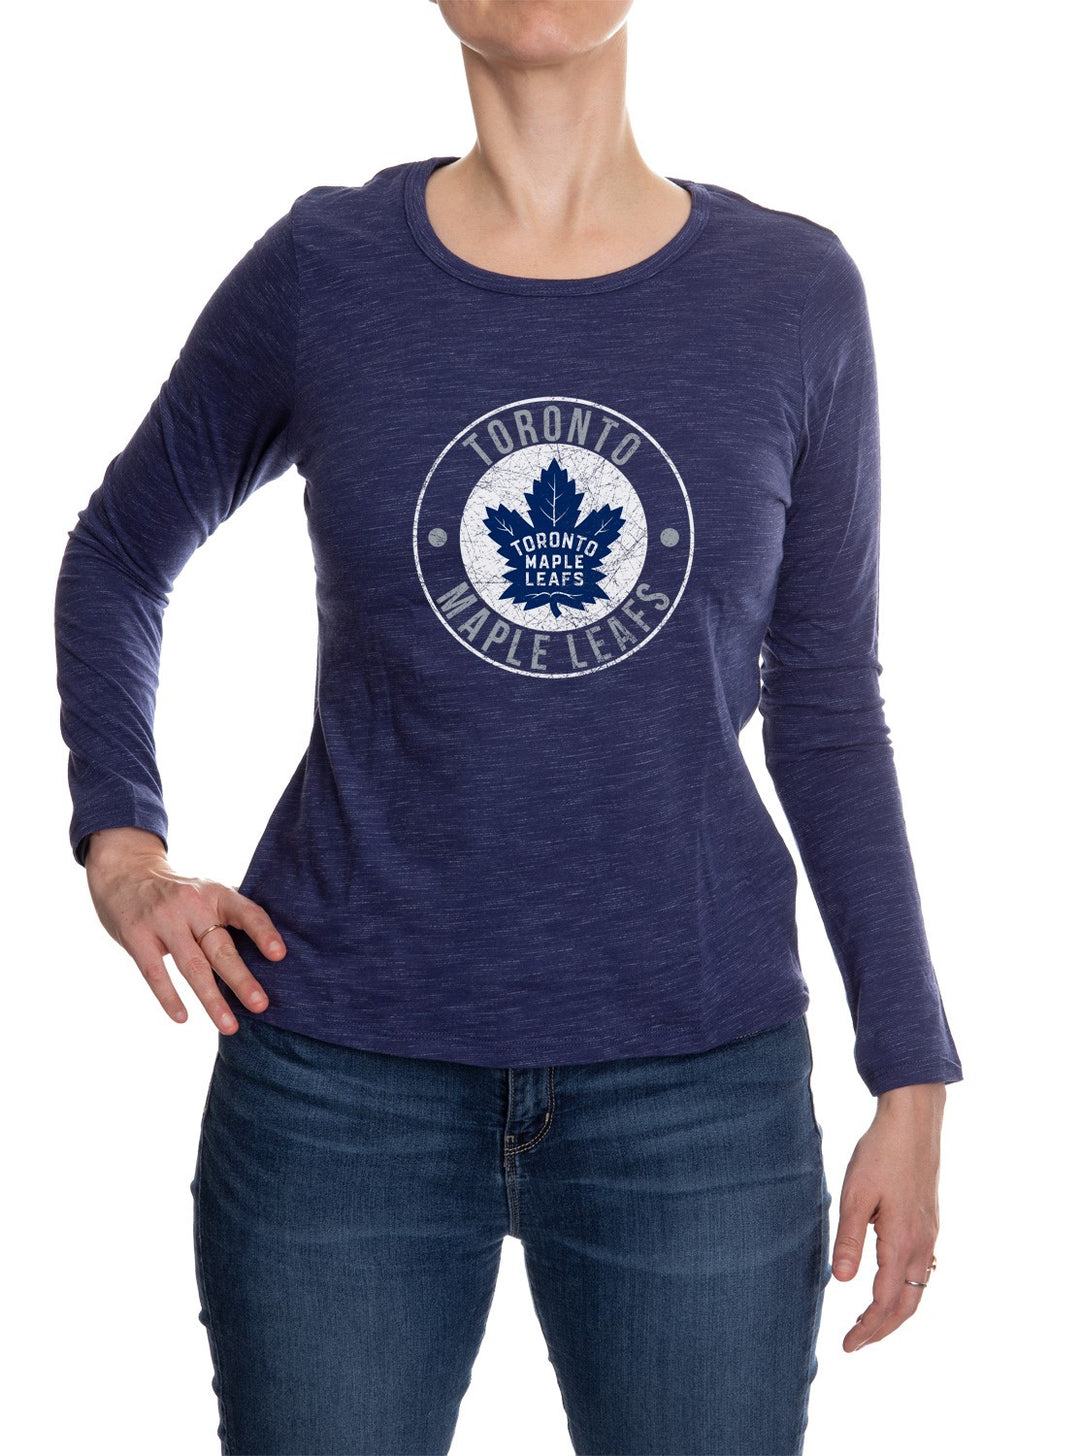 Top toronto Maple leafs X drew house shirt, hoodie, sweater and tank top